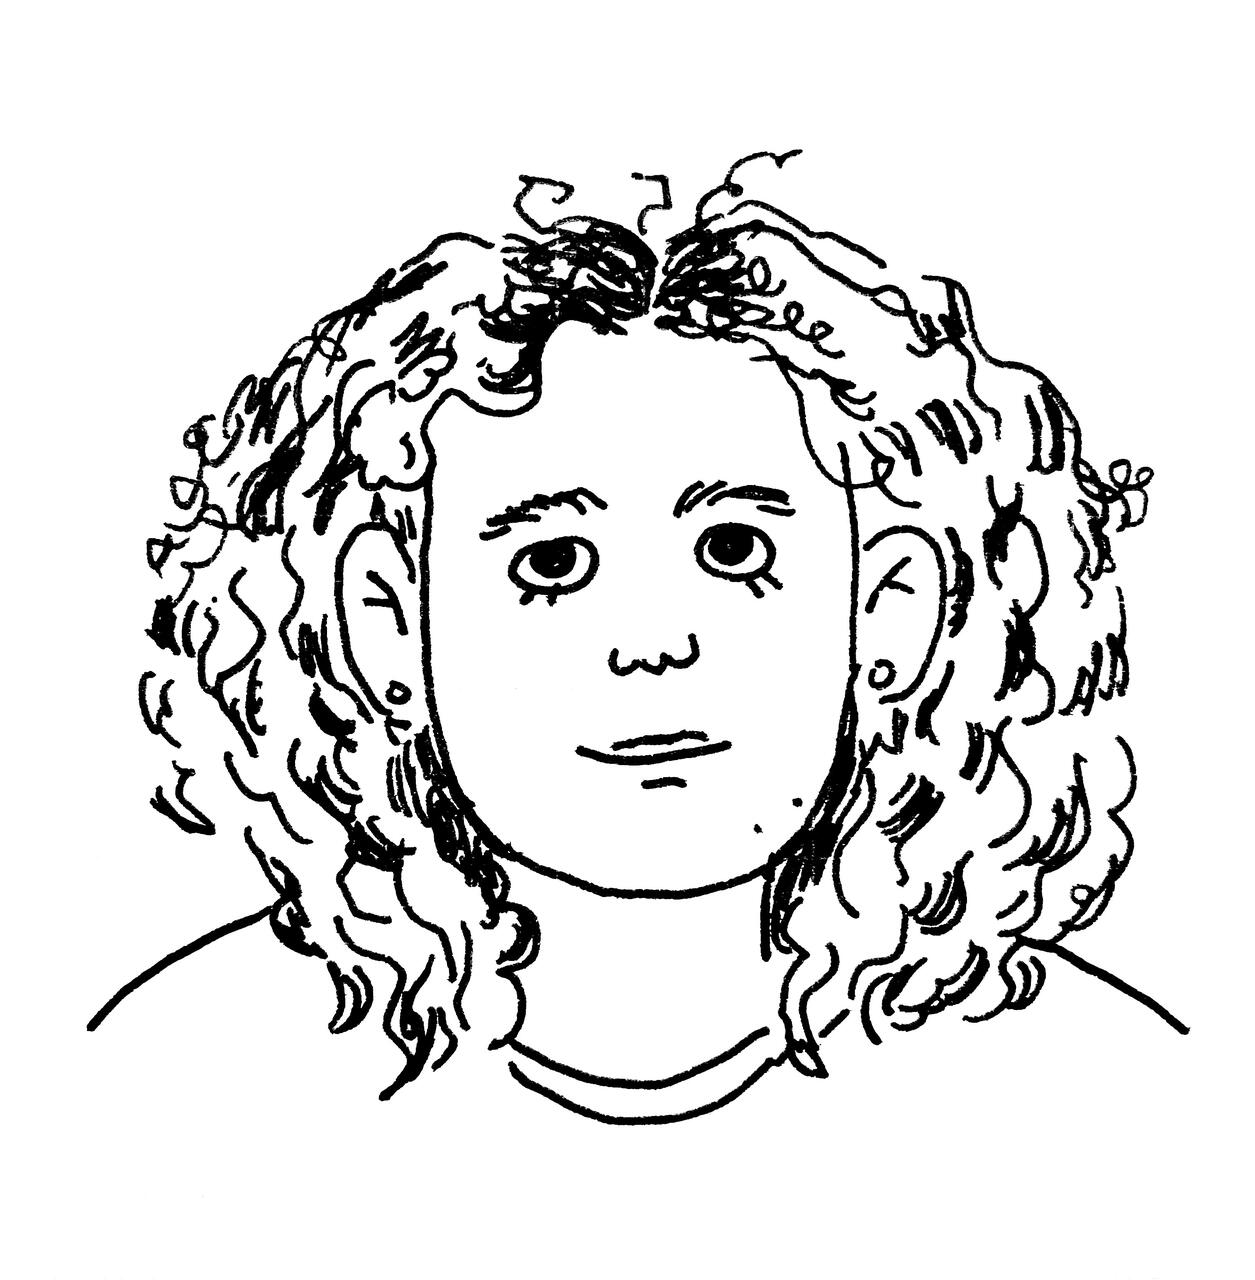 Illustrated self portrait of Bailey Gross